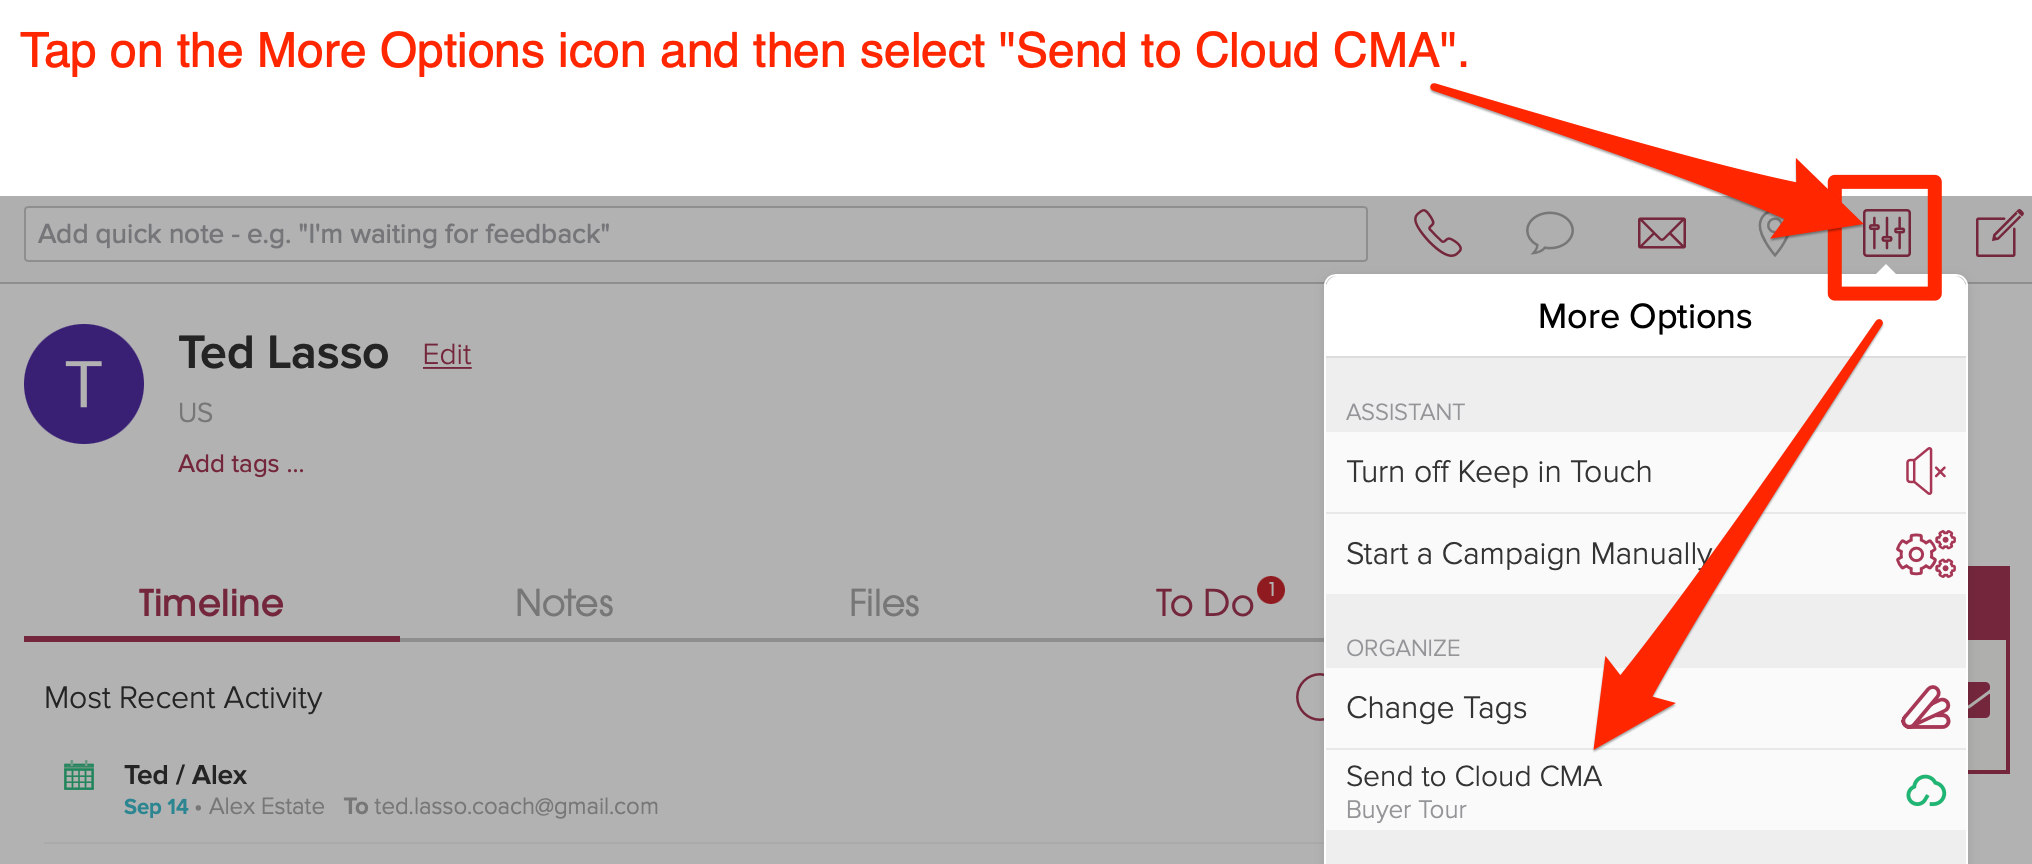 Tap on the More Option icon then select "Send to Cloud CMA".